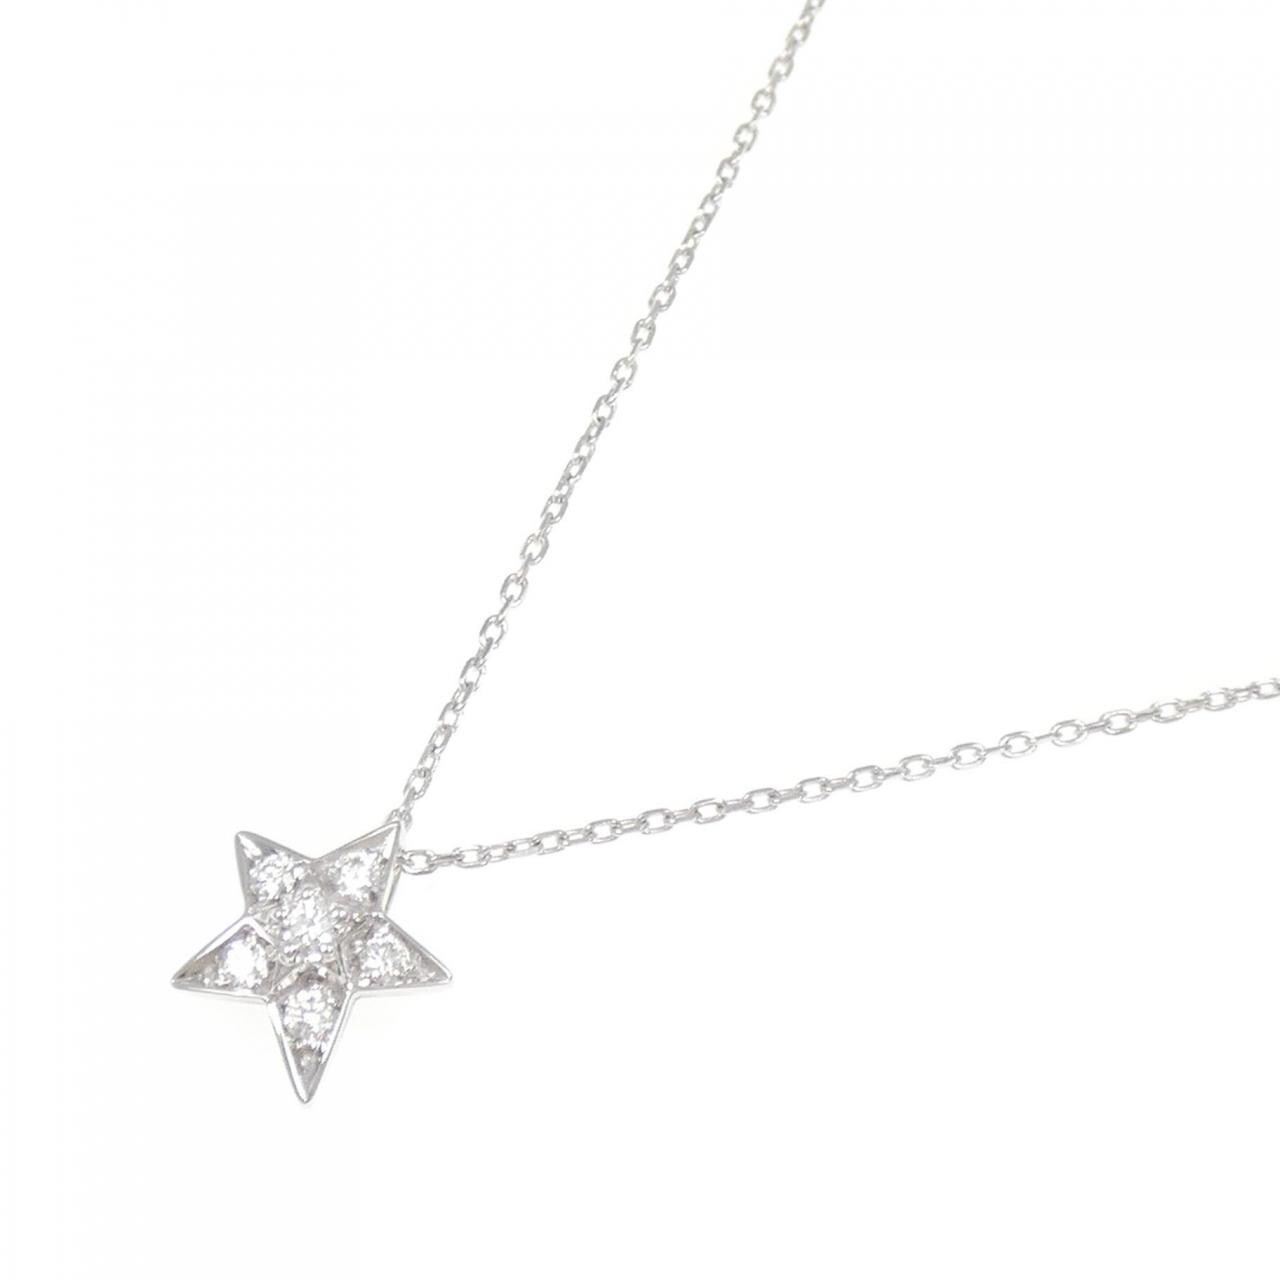 CHANEL comet small necklace